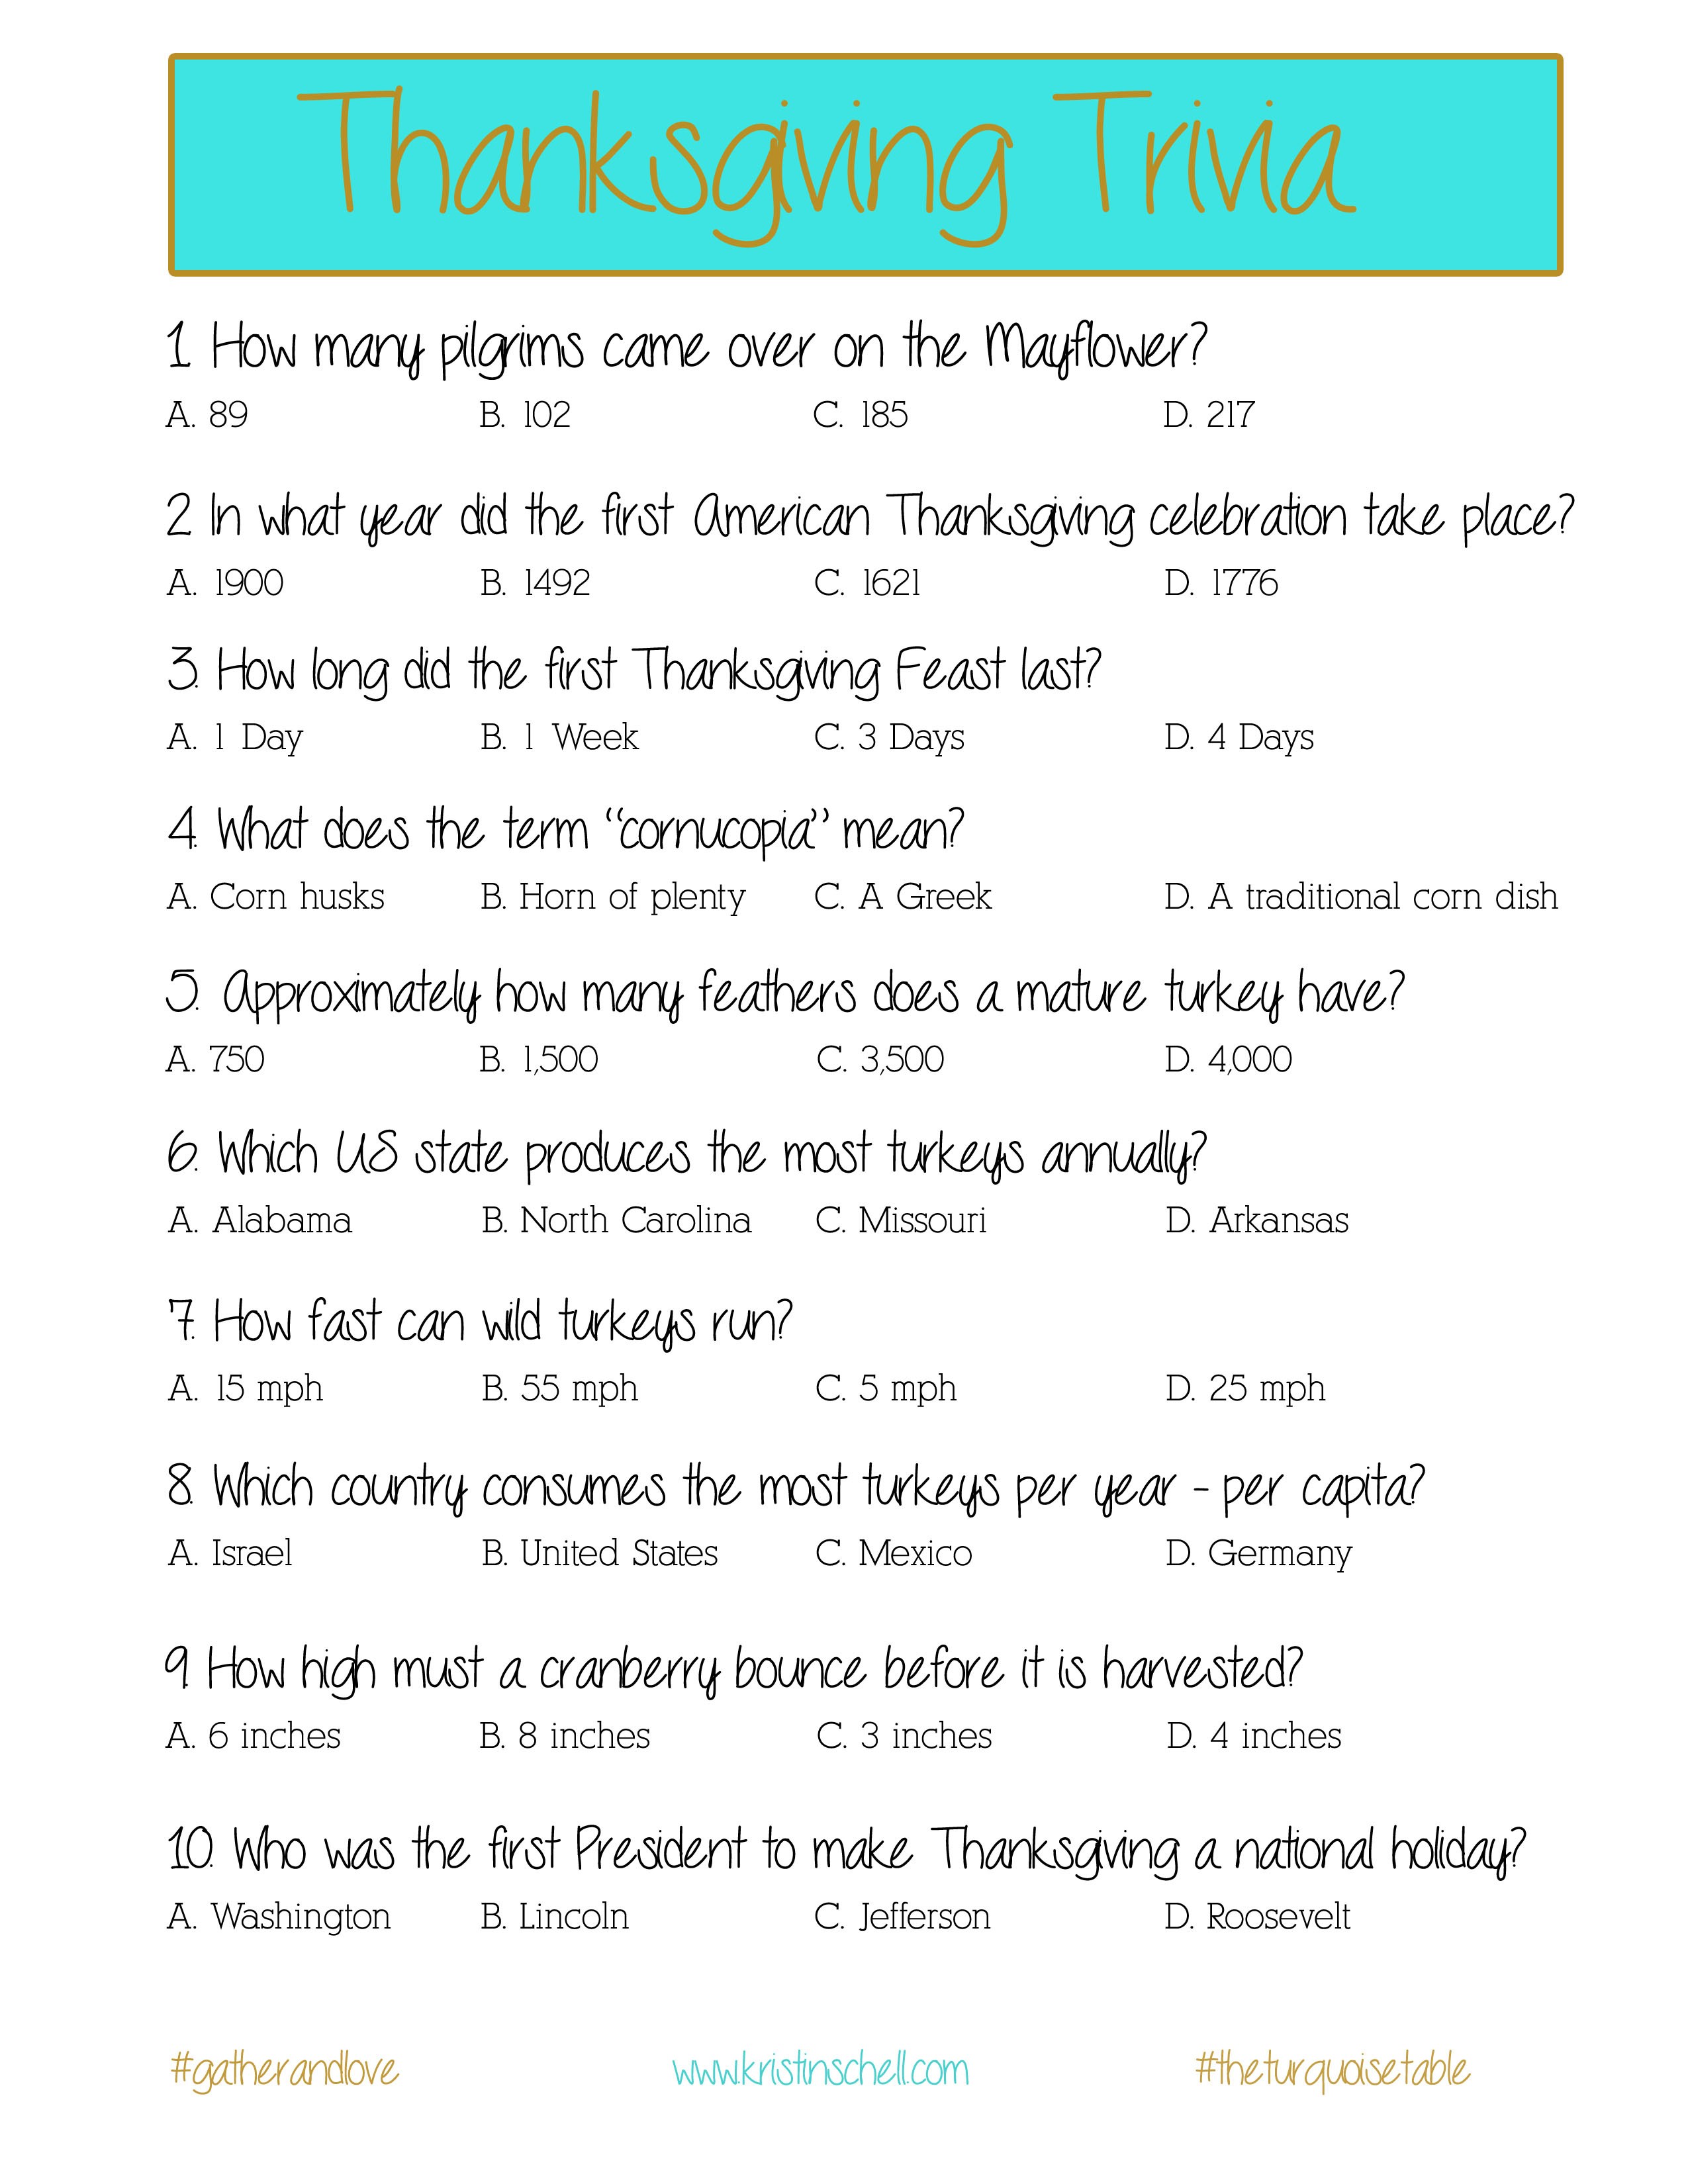 10 Thanksgiving Trivia Questions | KittyBabyLove.com